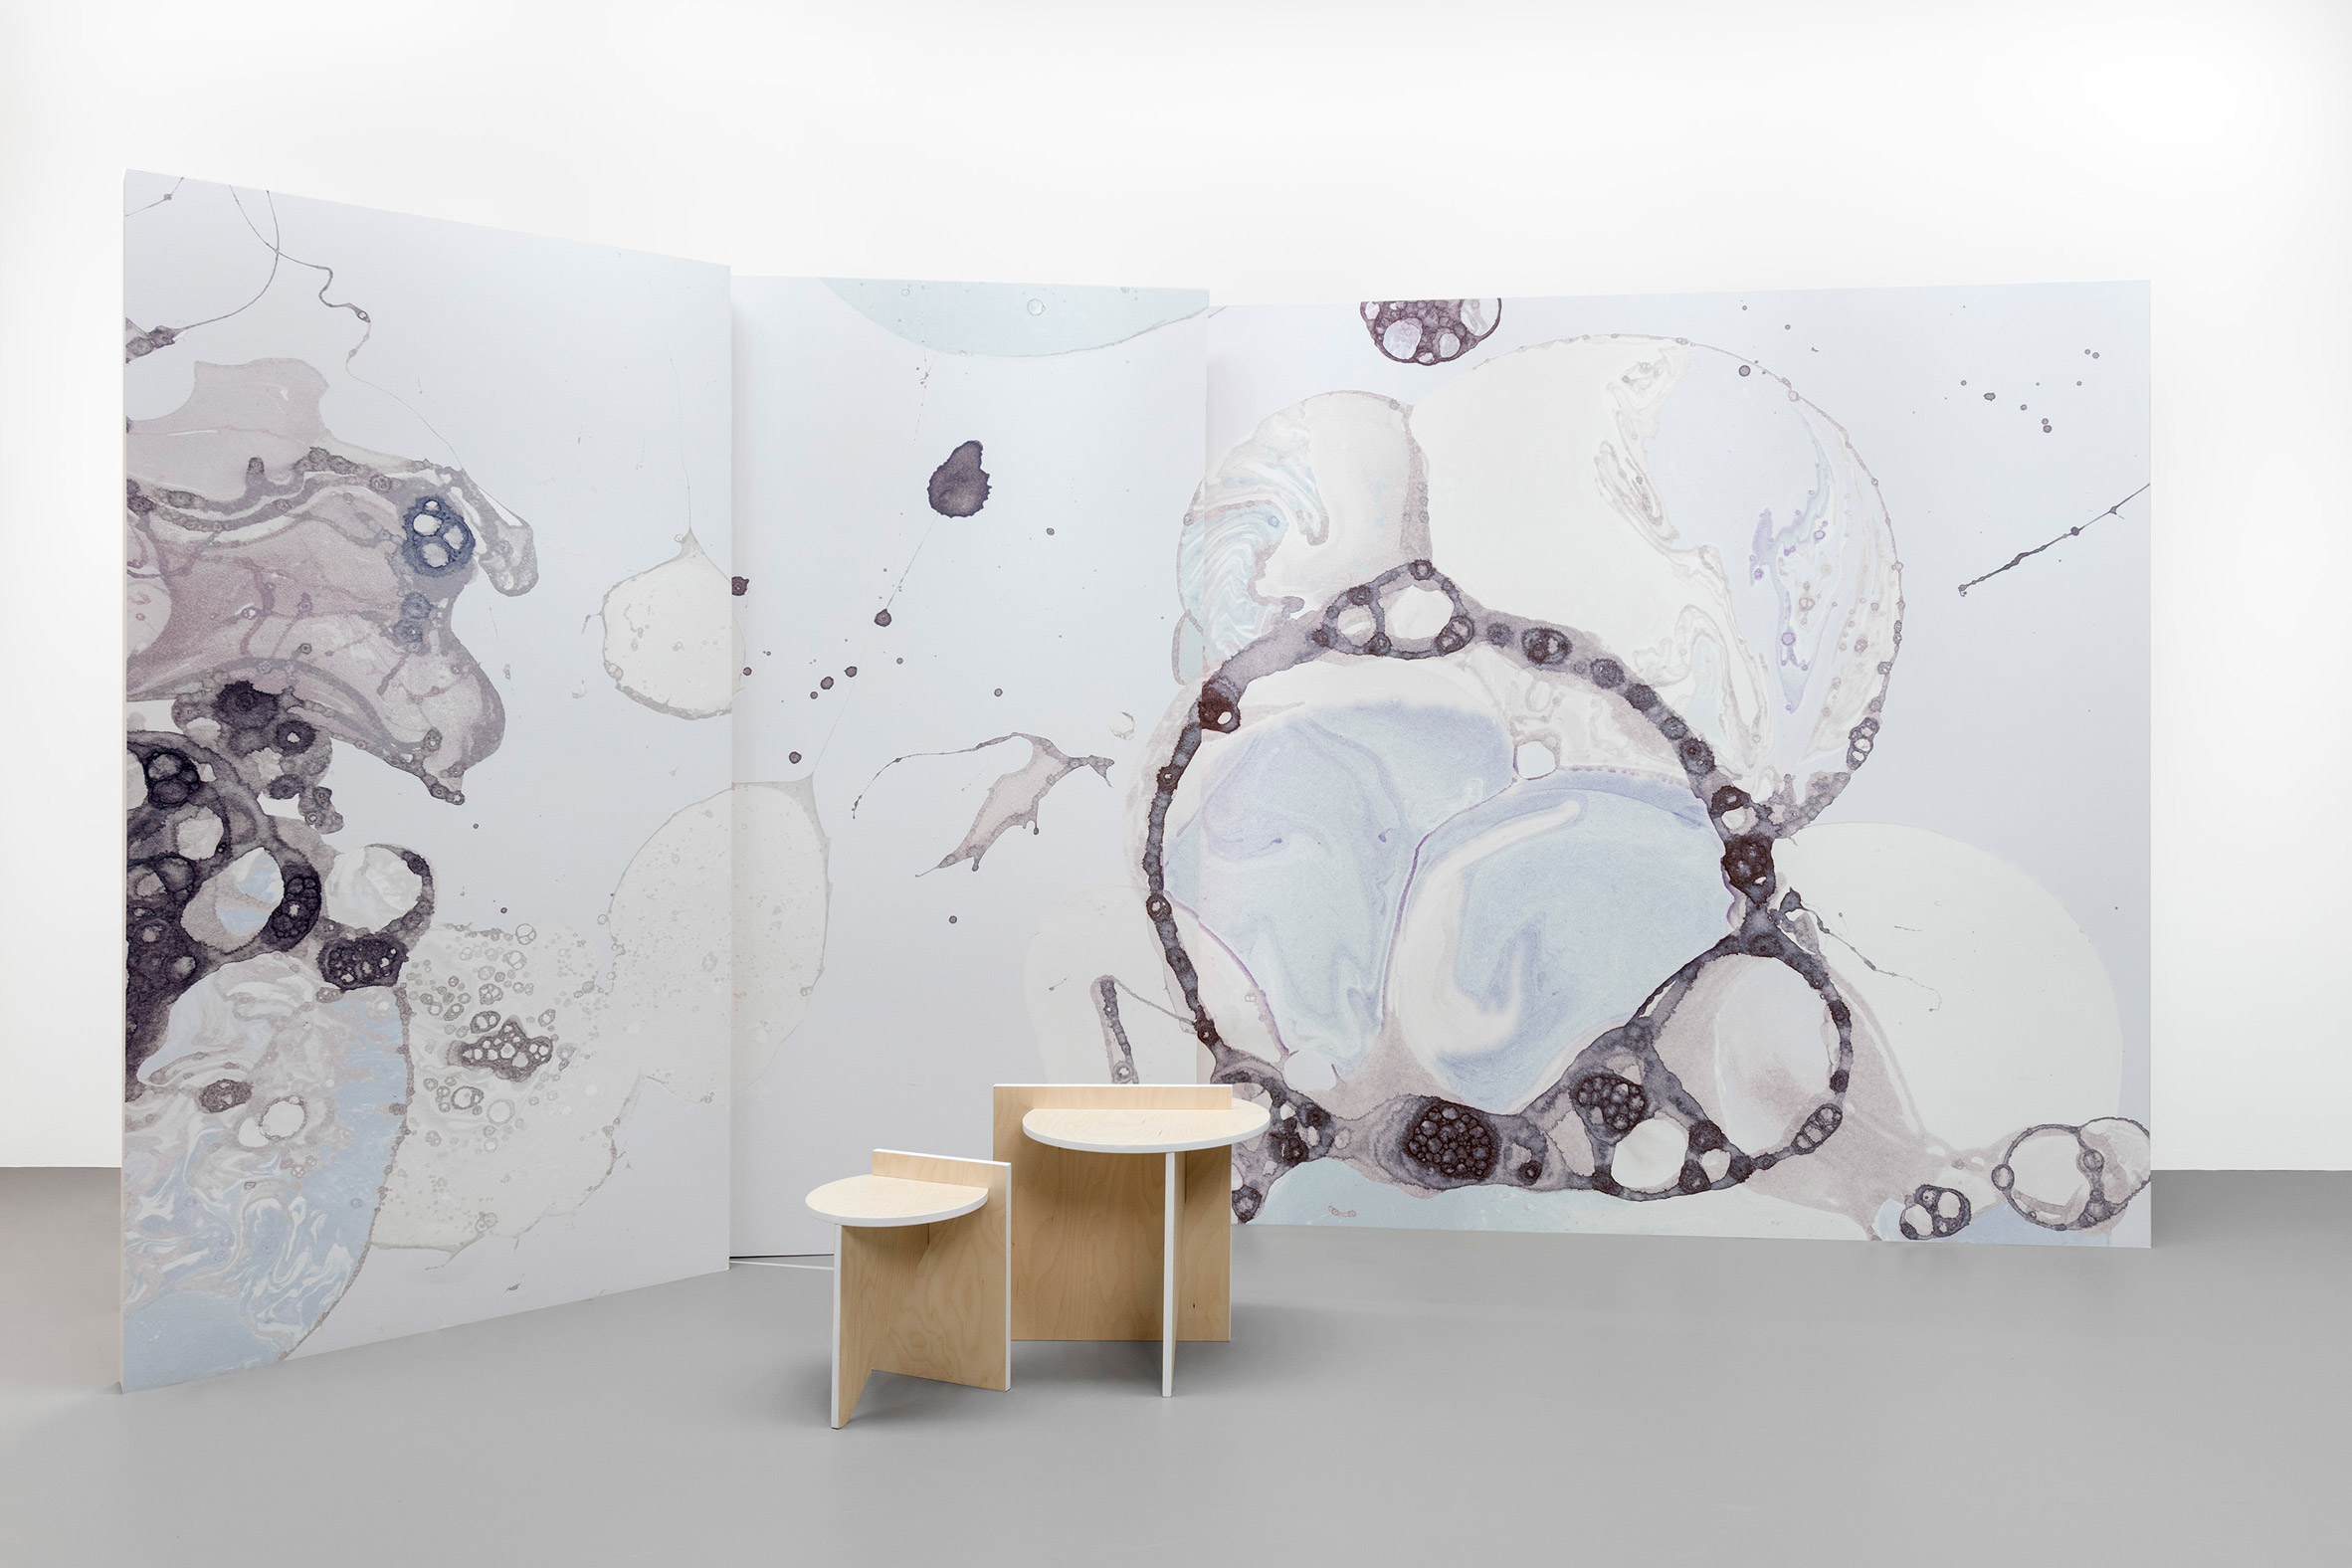 Lindsey Adelman and Calico Wallpaper use salt to pattern products